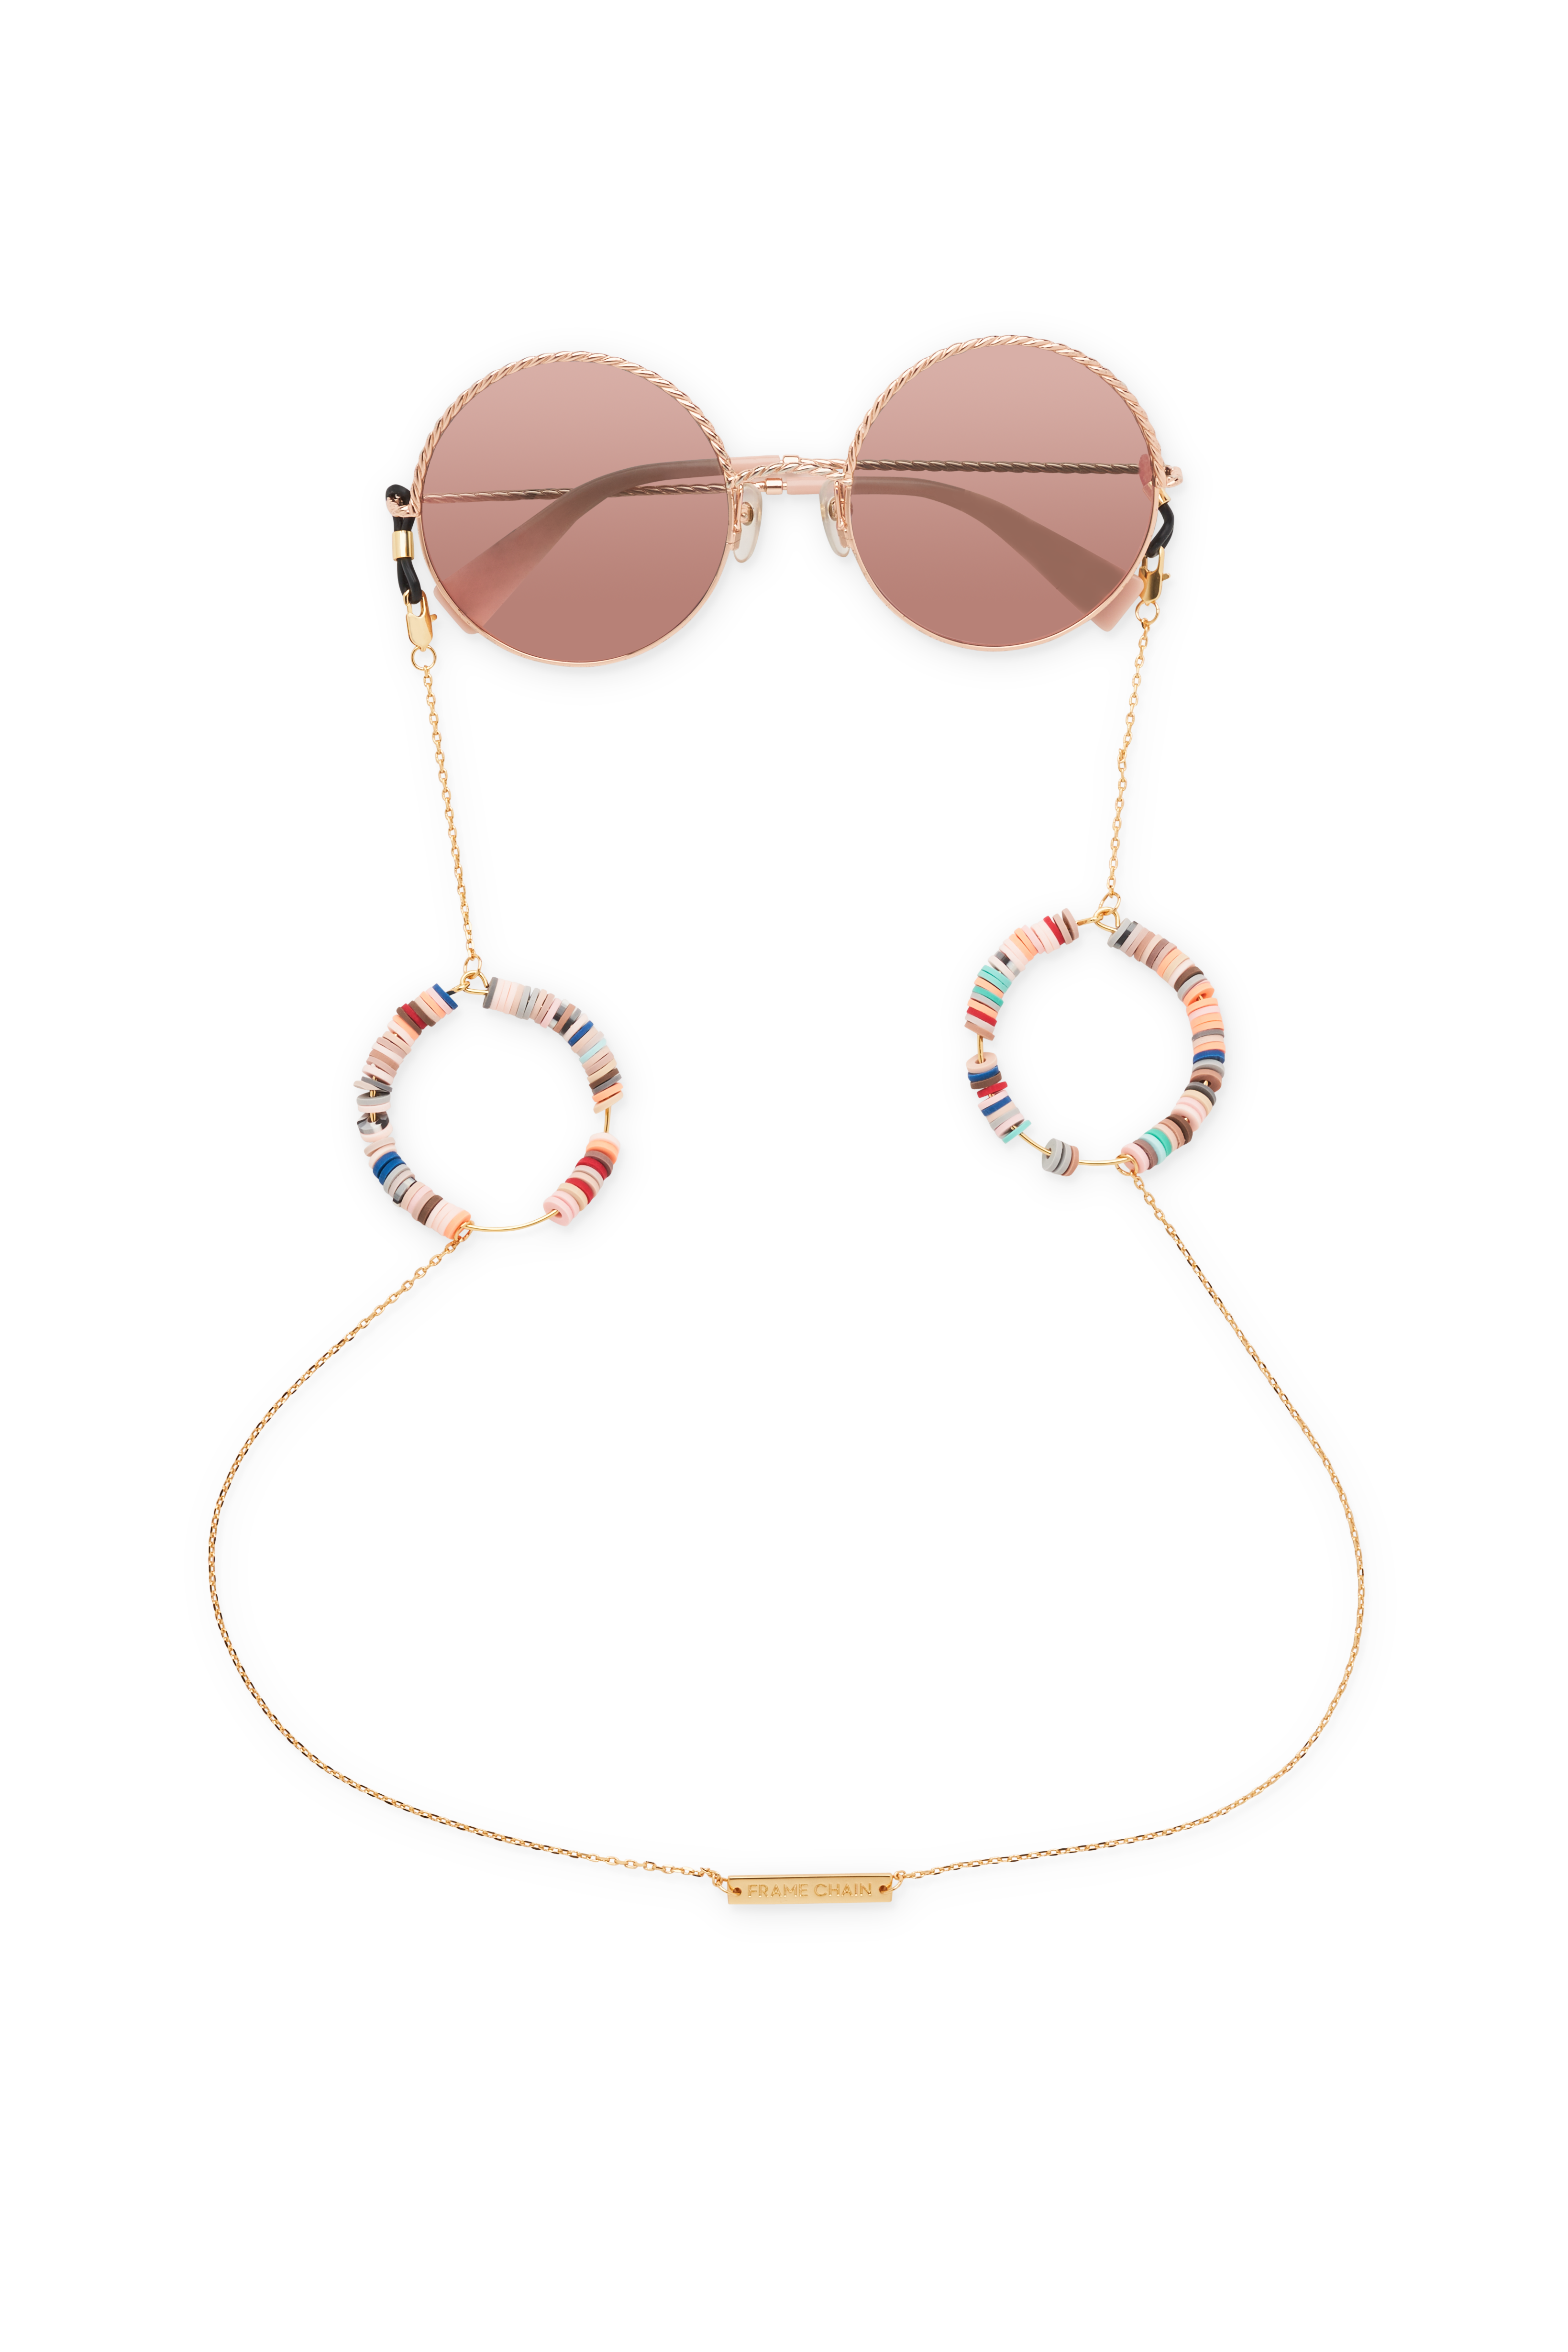 CANDY POP NUDE in YELLOW GOLD - Glasses Chain by FRAME CHAIN